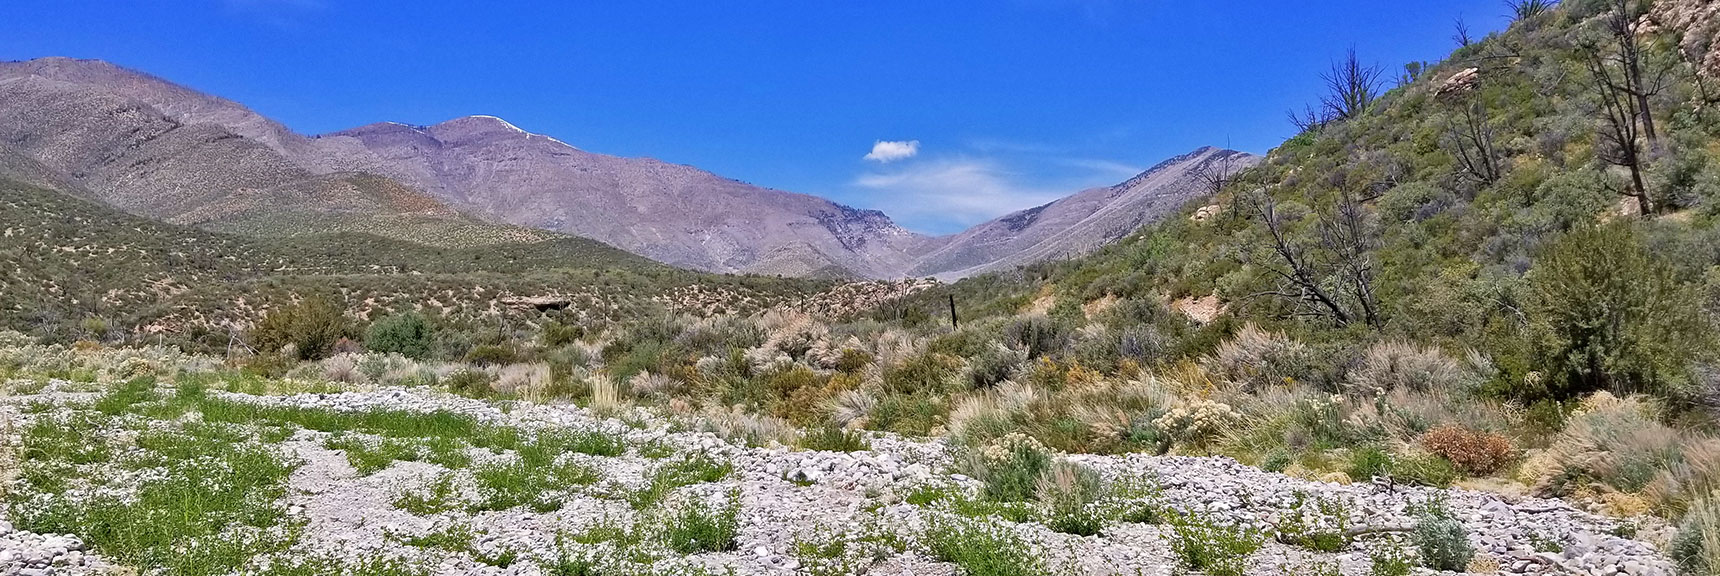 View Up Lowell Canyon, Lovell Canyon Trail, La Madre Mountains Wilderness, Nevada